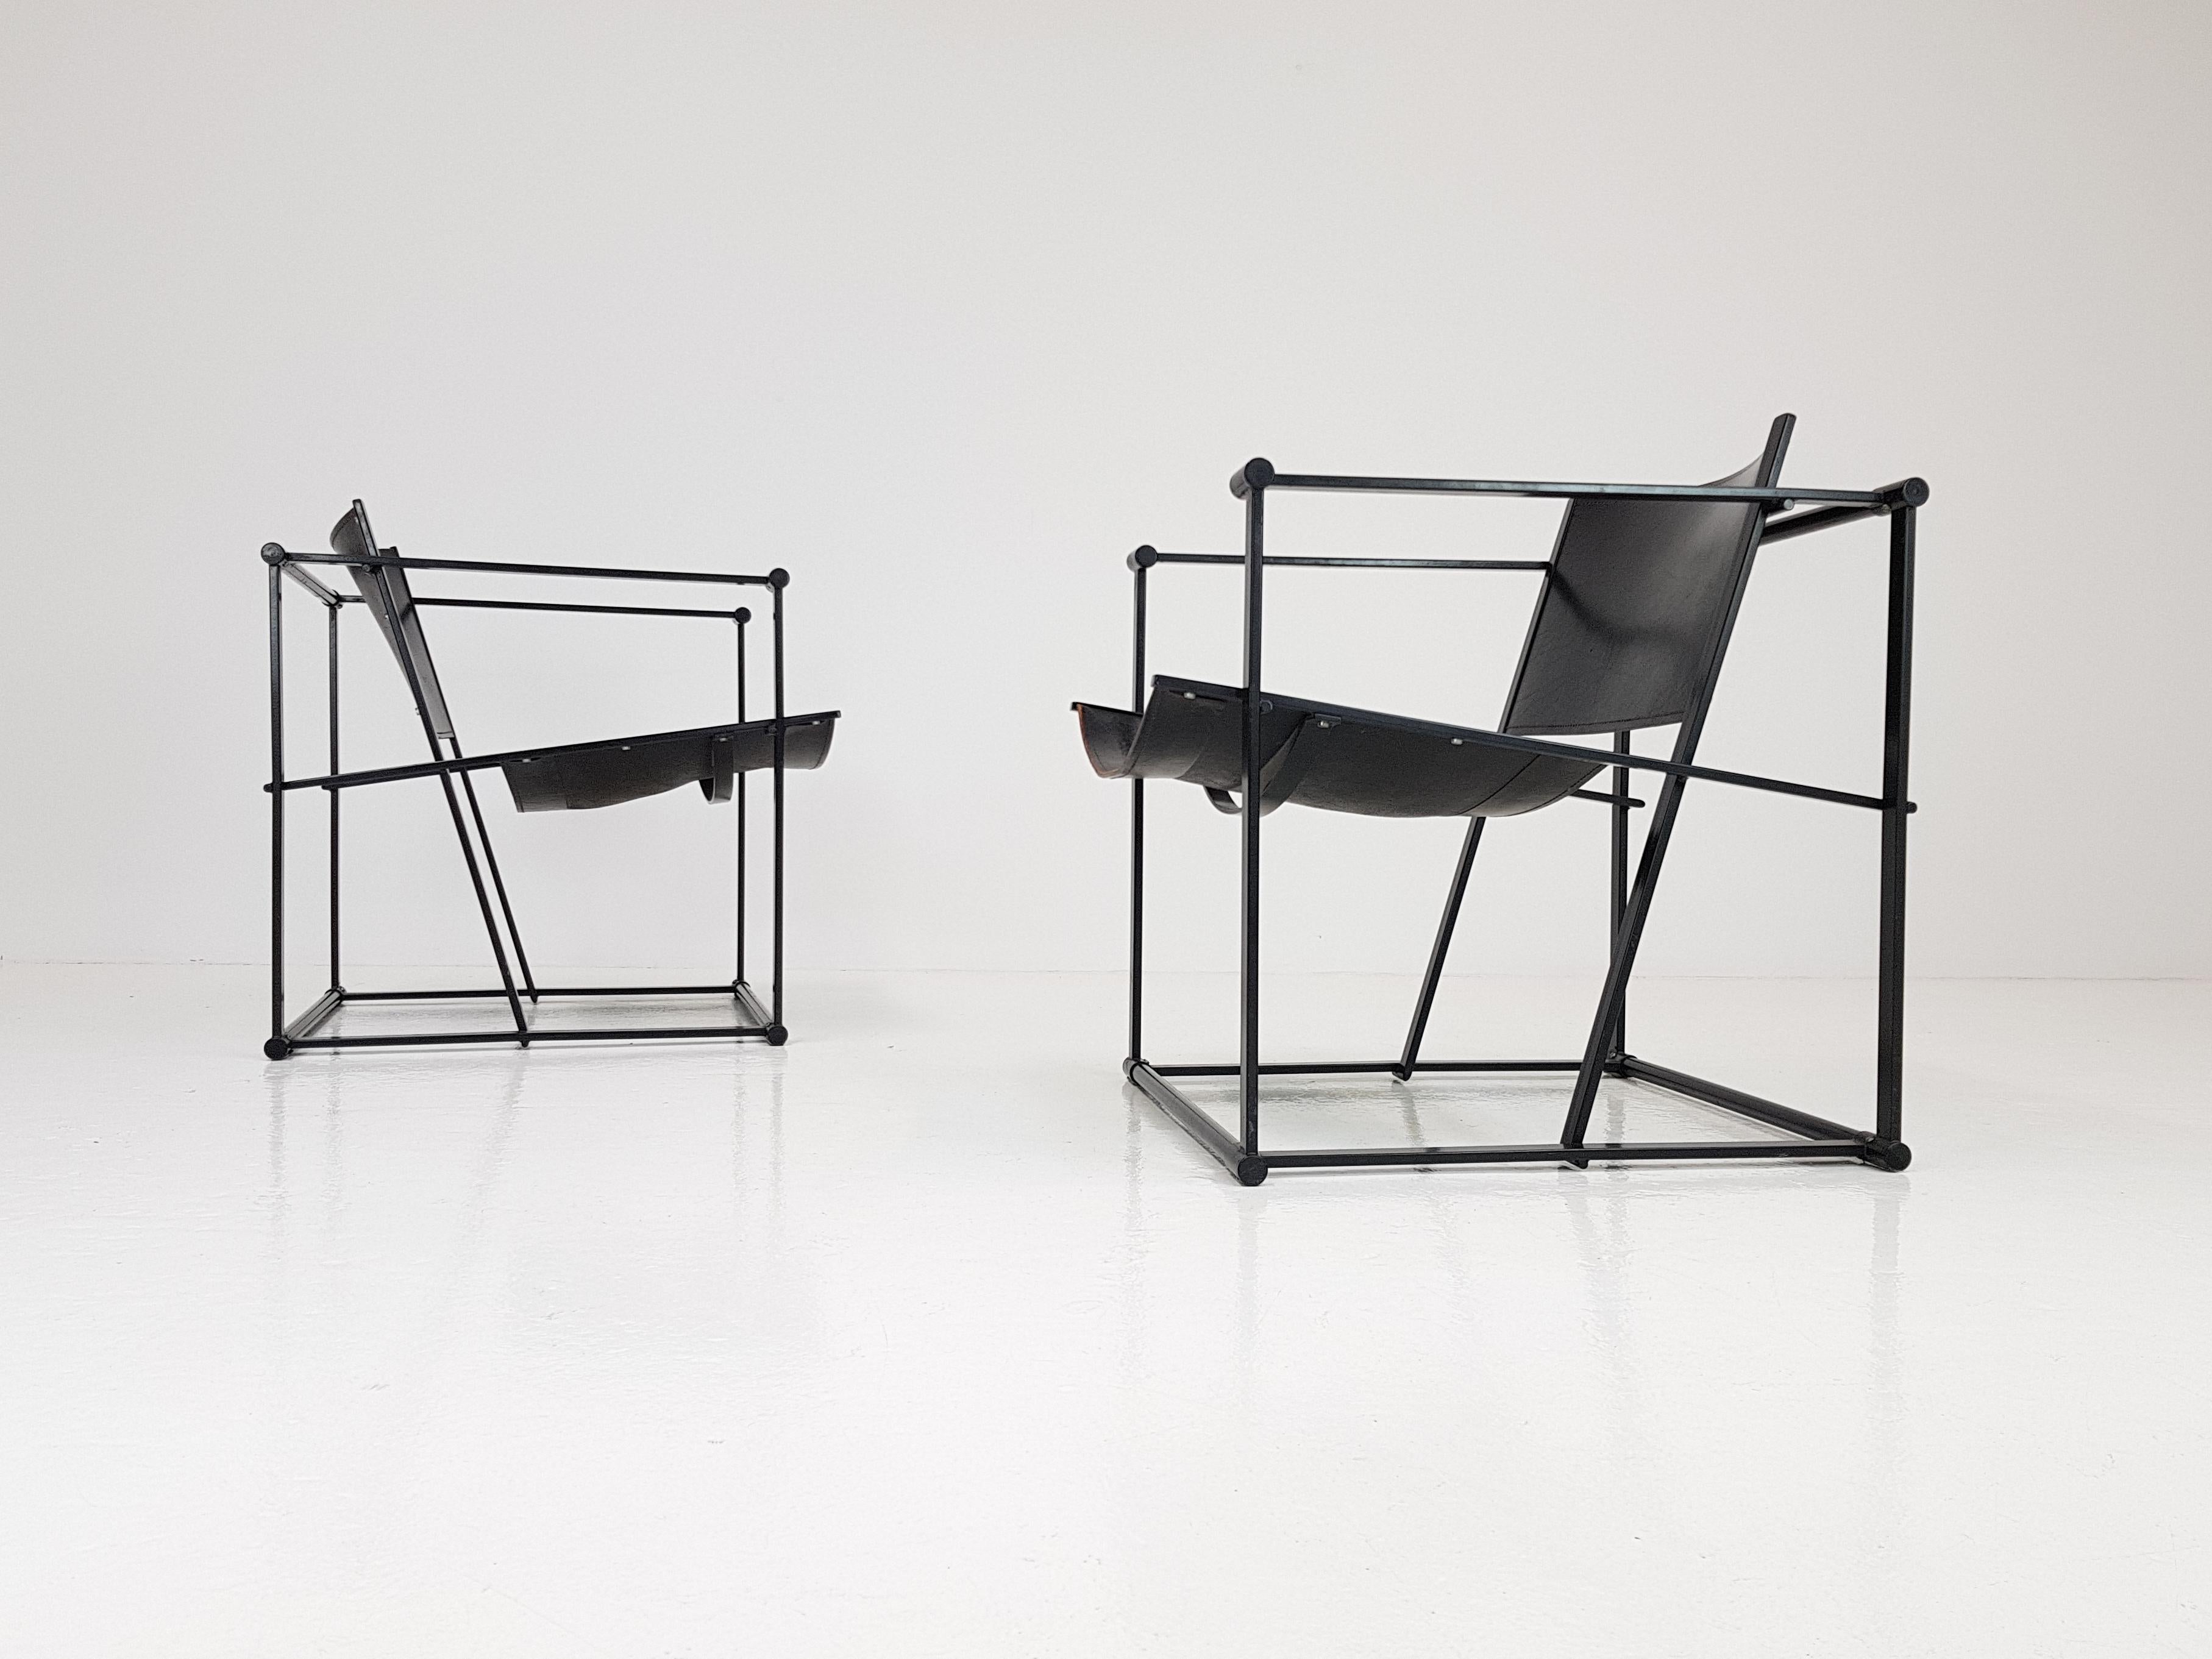 A pair of steel and leather FM62 chairs by Radboud Van Beekum for Pastoe, 1980s.

Constructed from geometrically folded steel with bent ply seating. Inspired by the designs of Gerrit Rietveld and following the traditions of the De Stijl movement